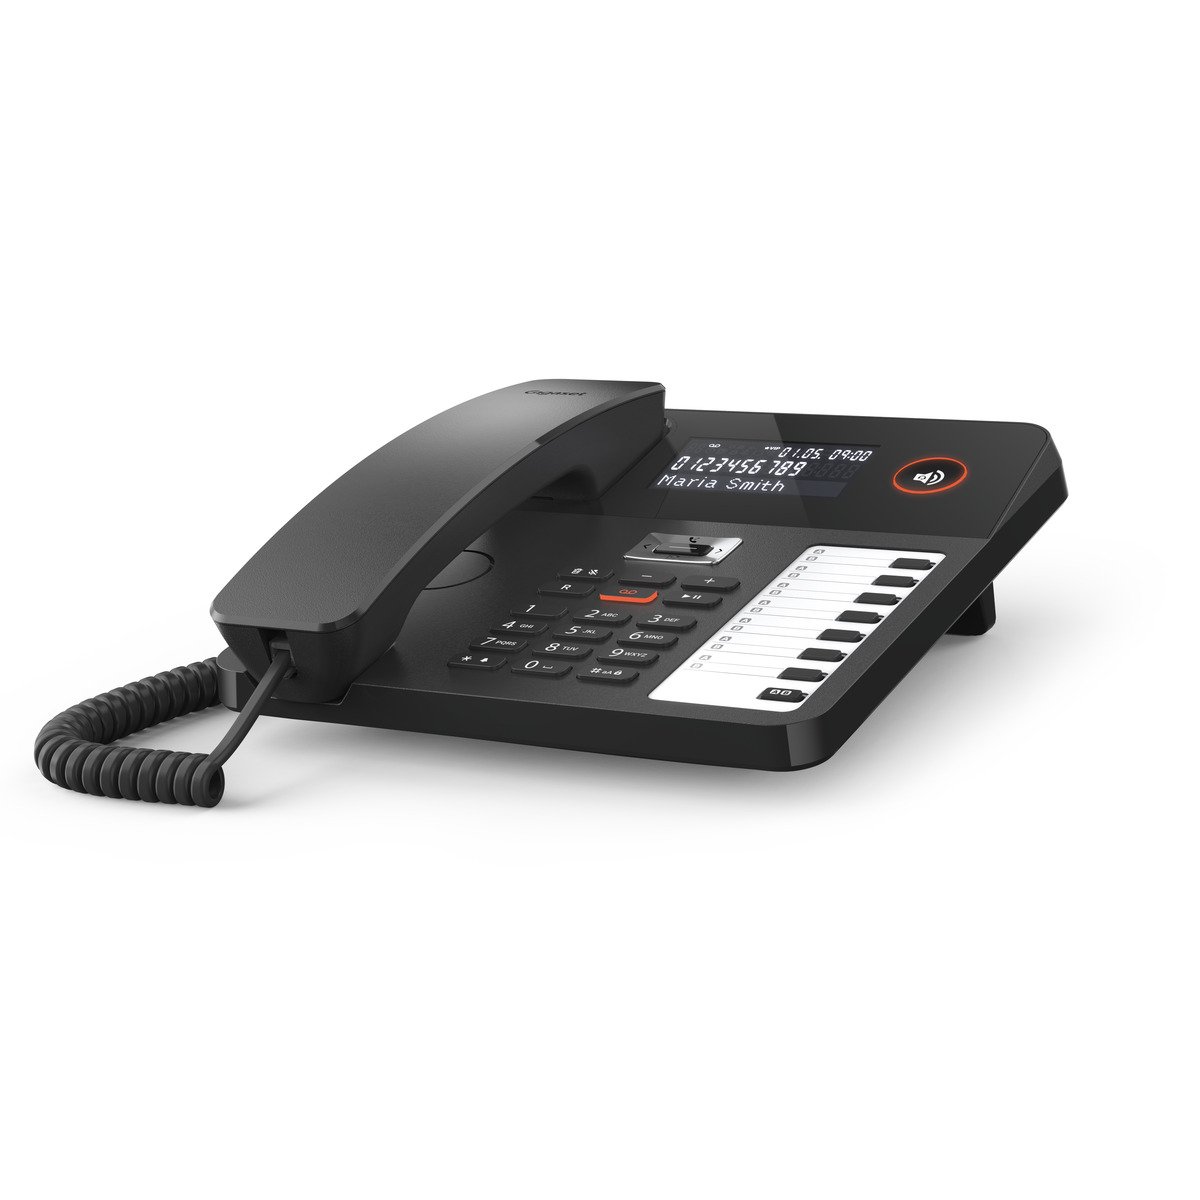 the wall Discover DESK desk telephone 800A with and Gigaset machine answering